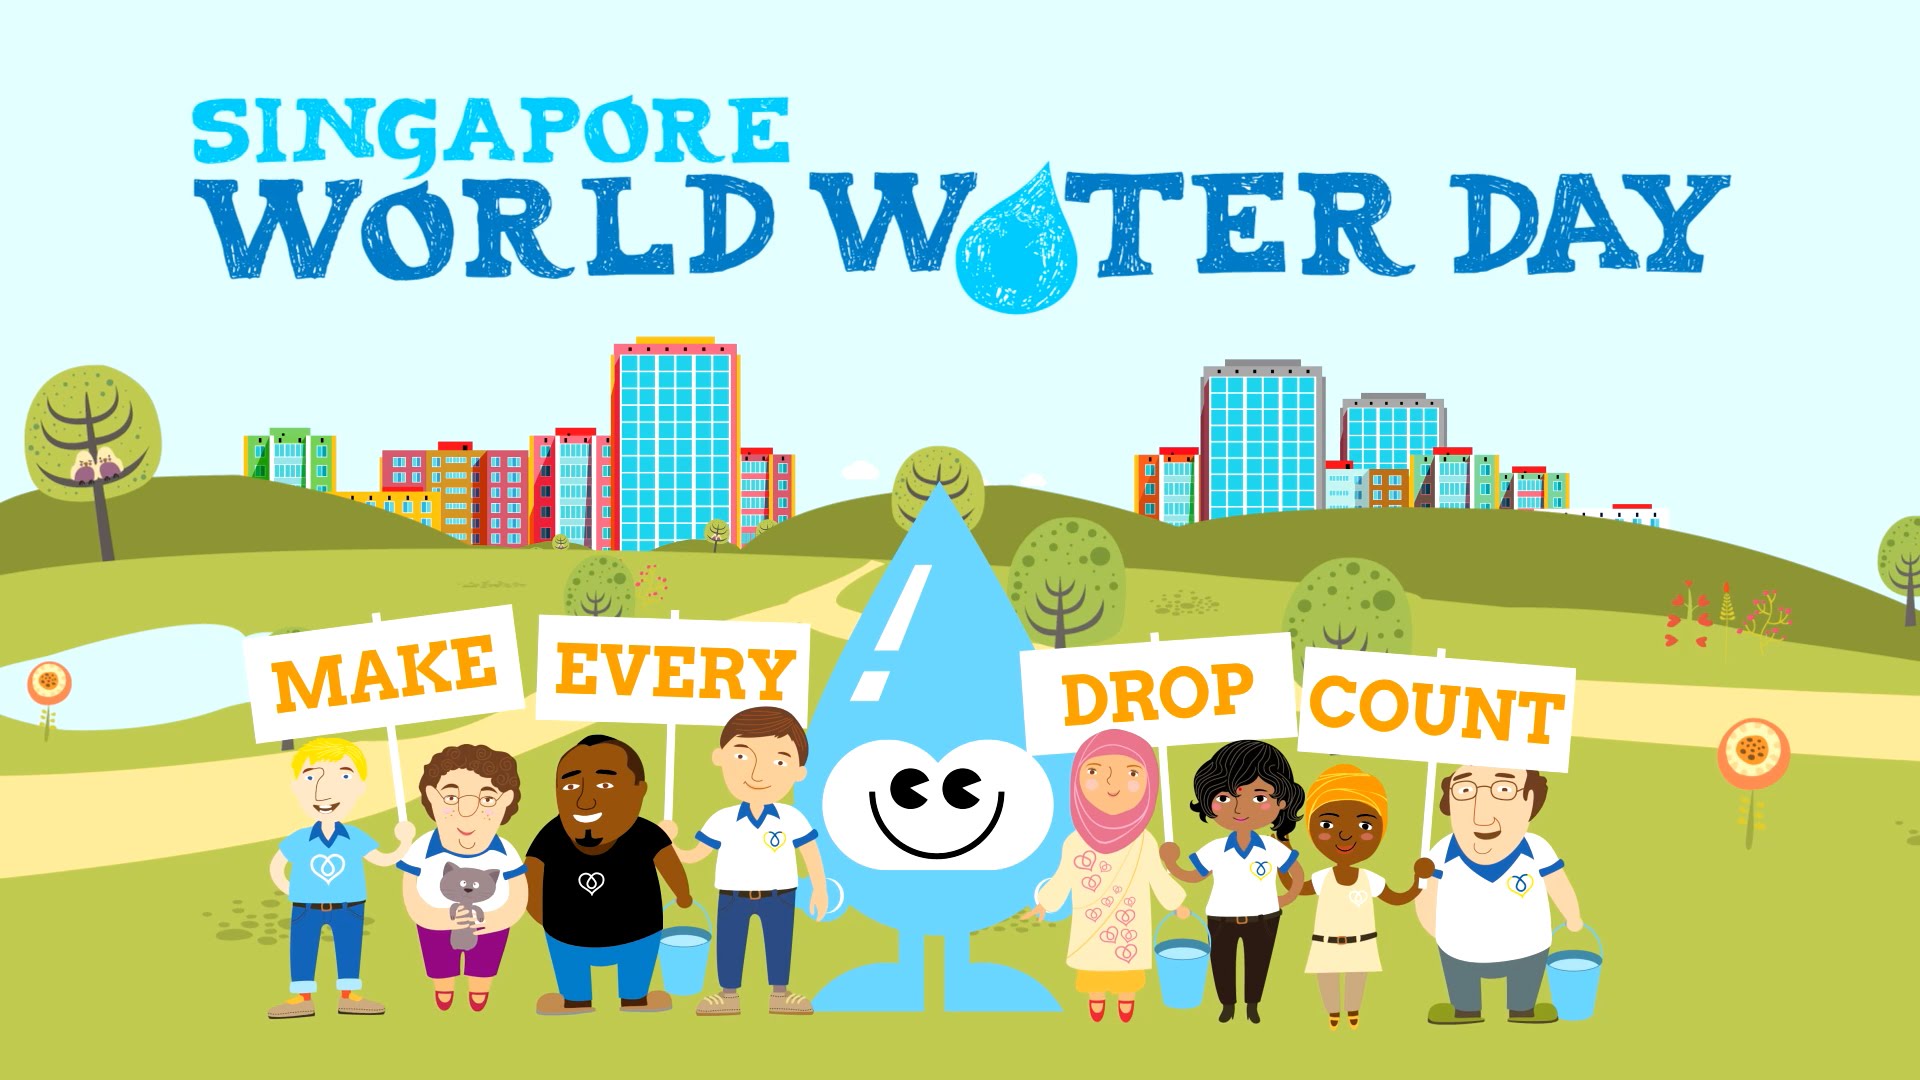 World Water Day Image Gifs Slogans Howtodoanything